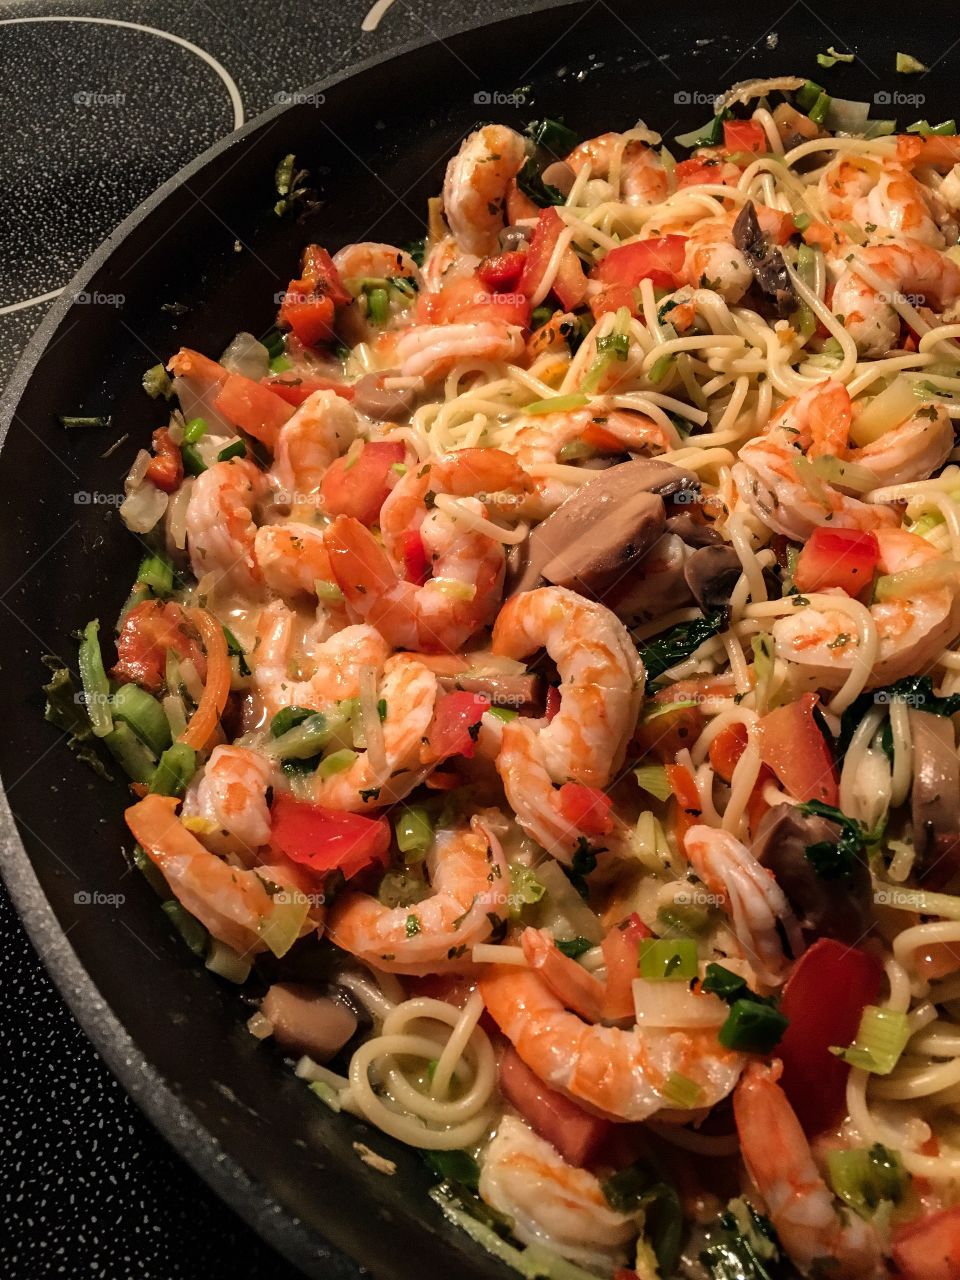 Shrimp and vegetables with pasta 